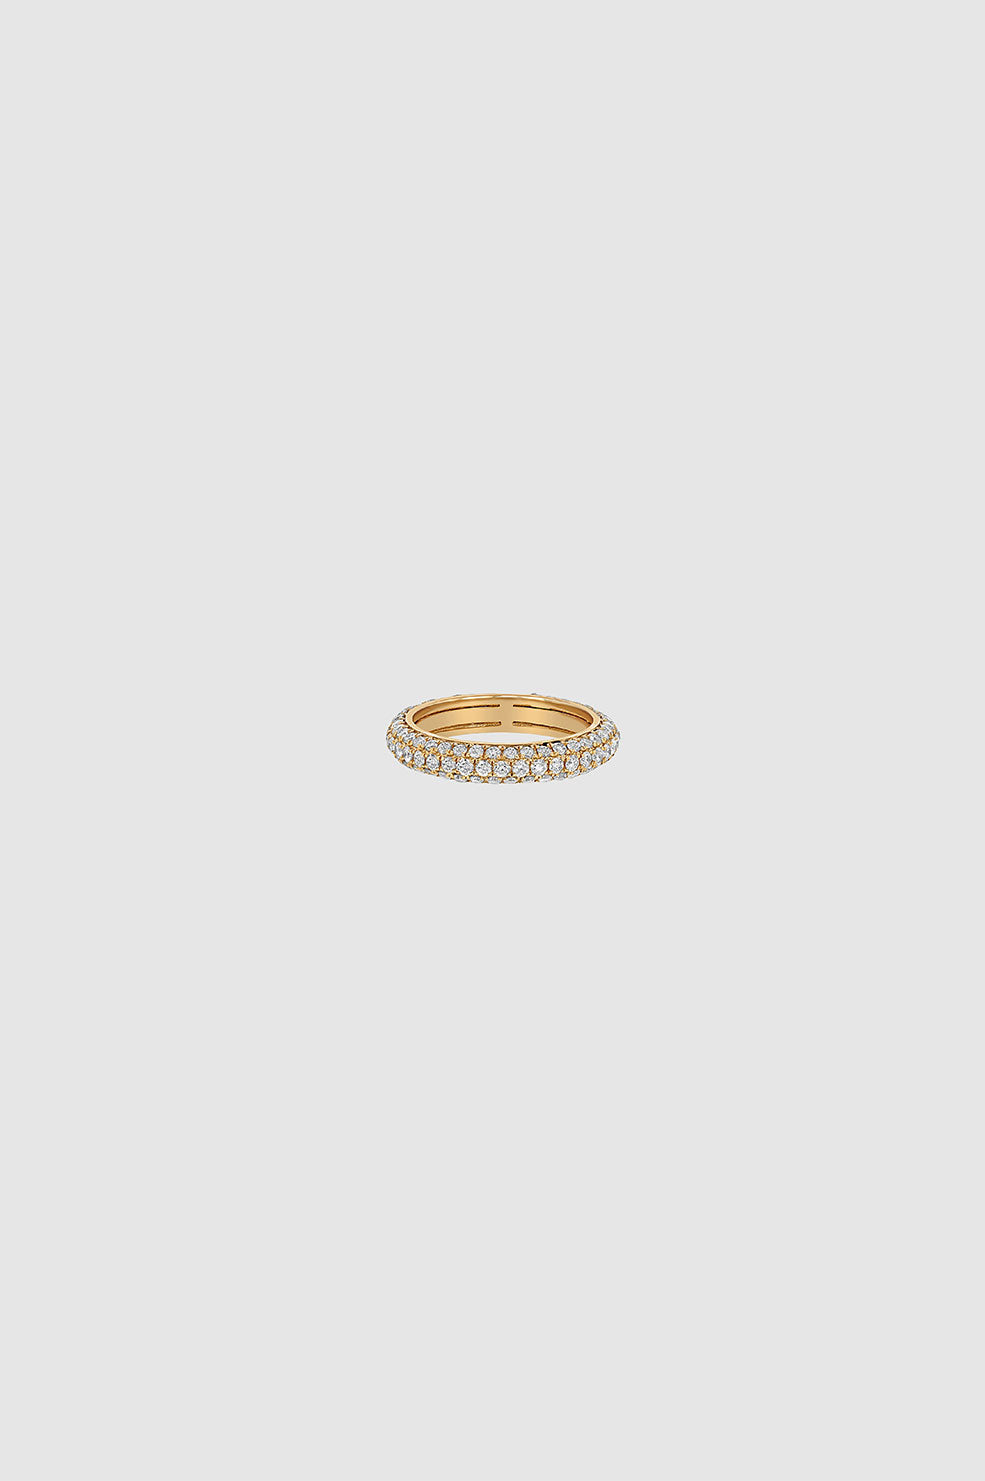 ANINE BING Delicate Diamond Pinky Ring - 14k Gold - Front View